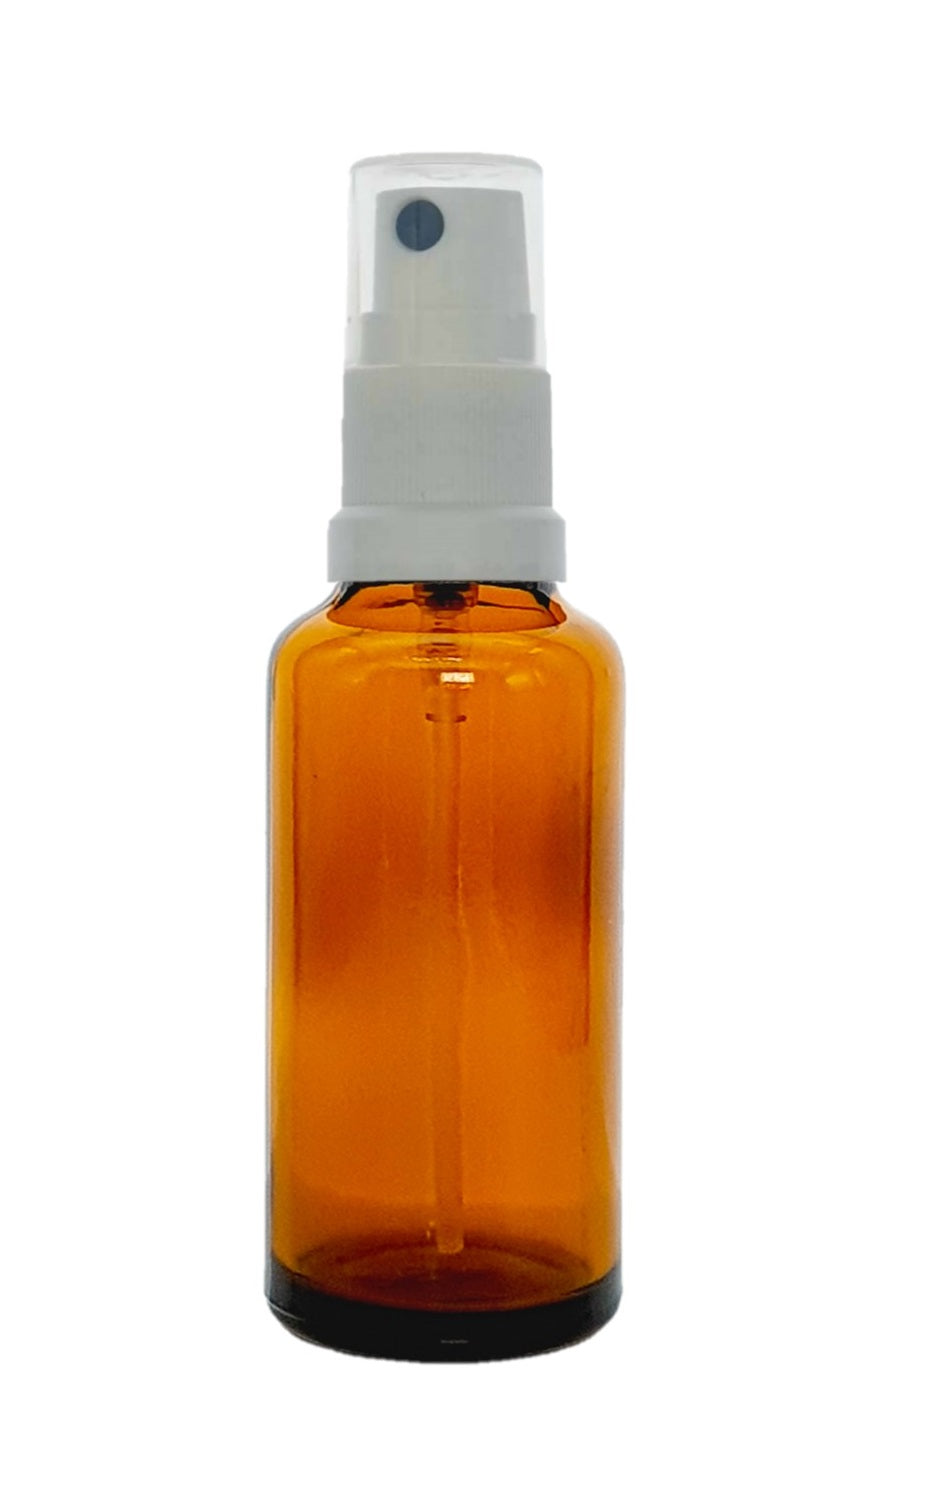 25ml Amber Glass Bottles with White Atomiser Spray and Clear Overcap